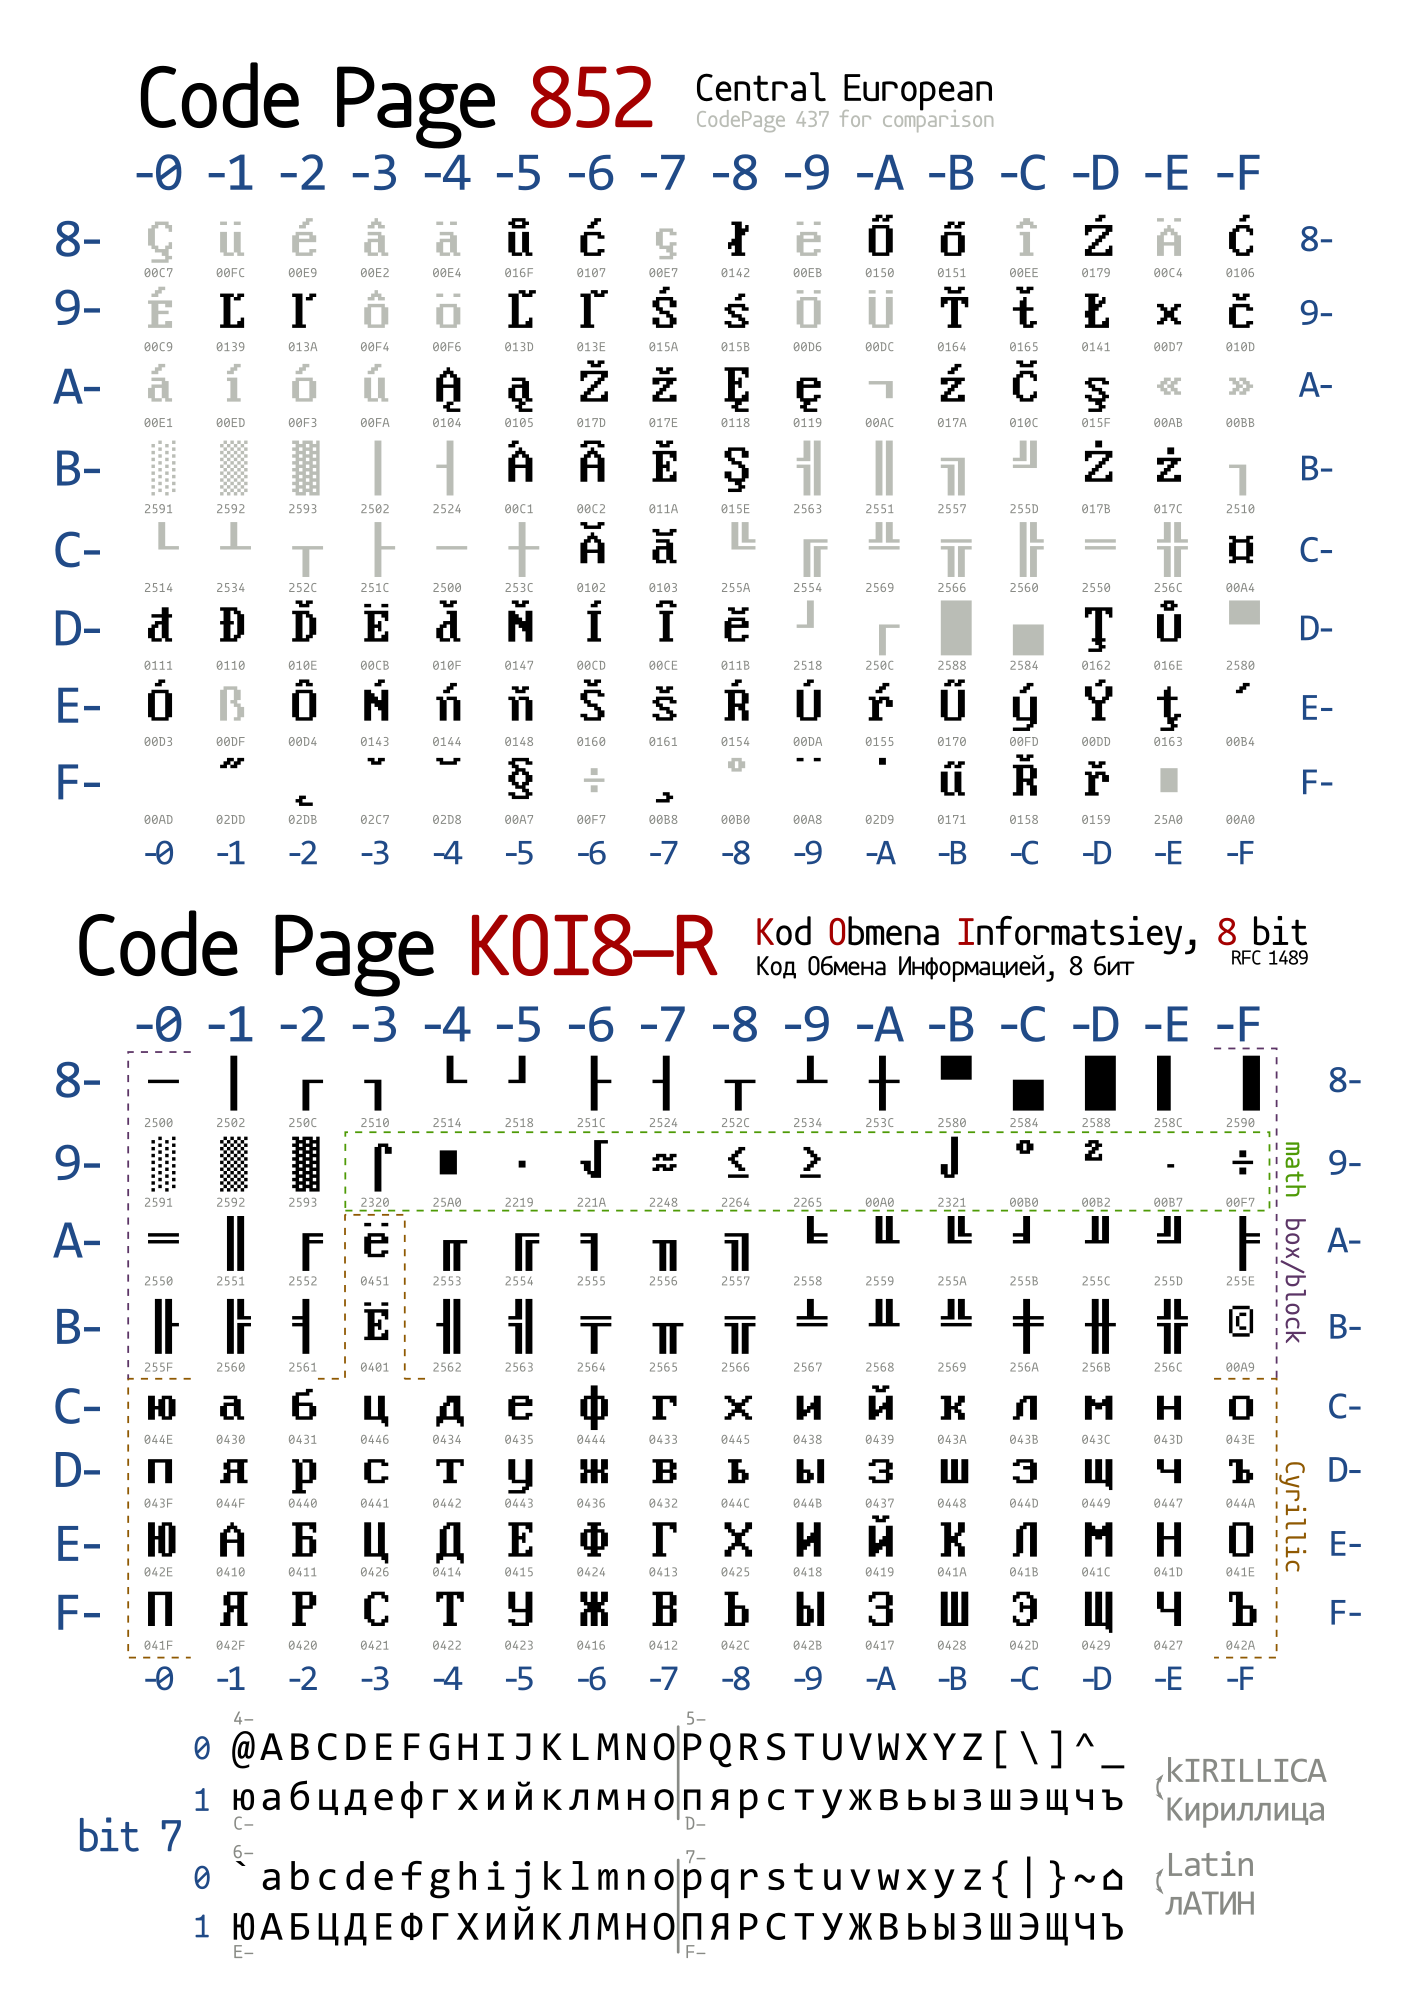 Central European and KOI8-R pages